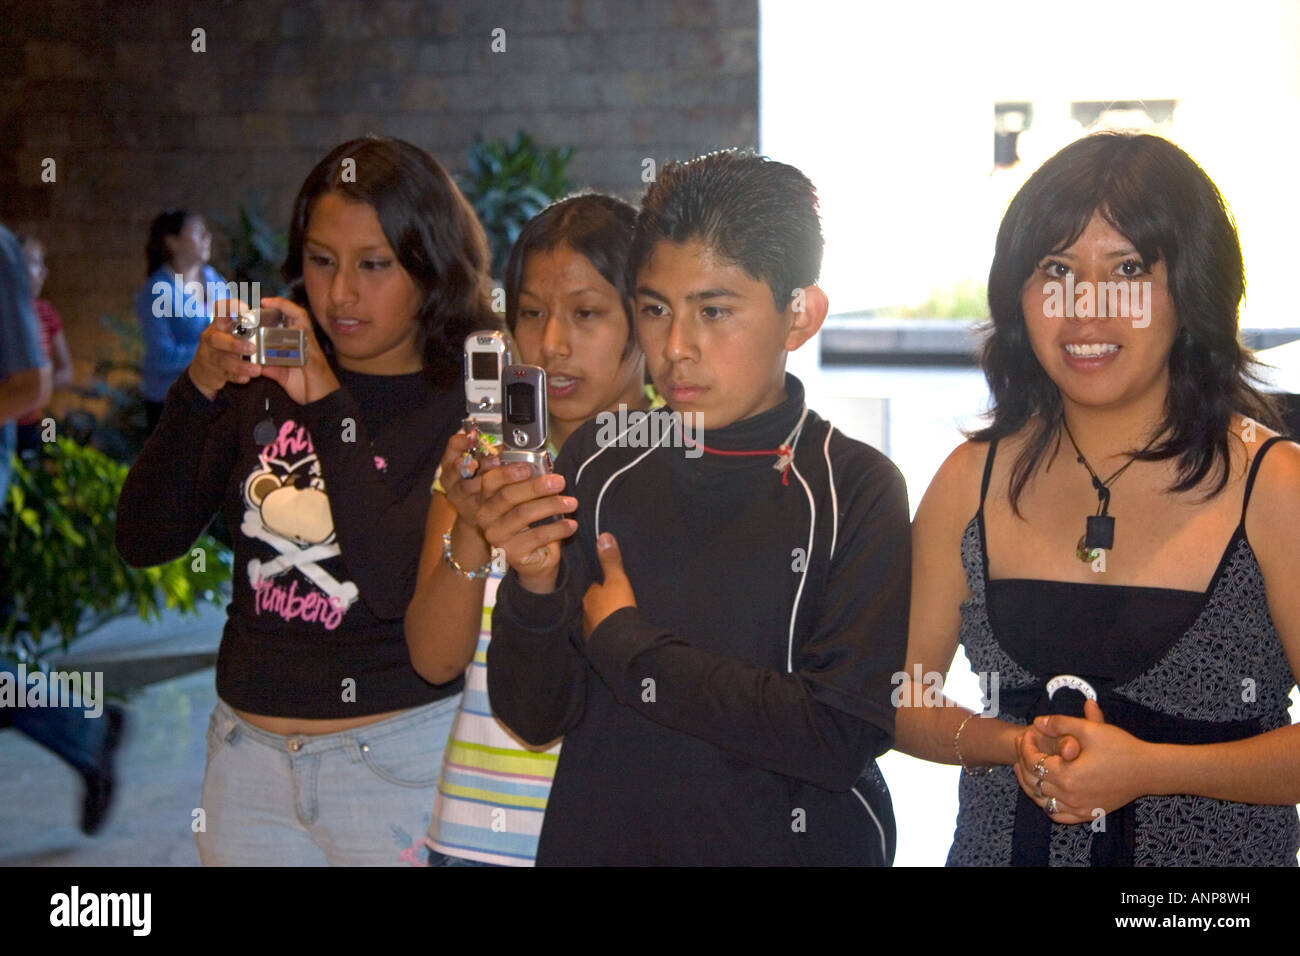 Mexican teens use cell phone cameras at the National Museum of Anthropology in Mexico City Mexico Stock Photo